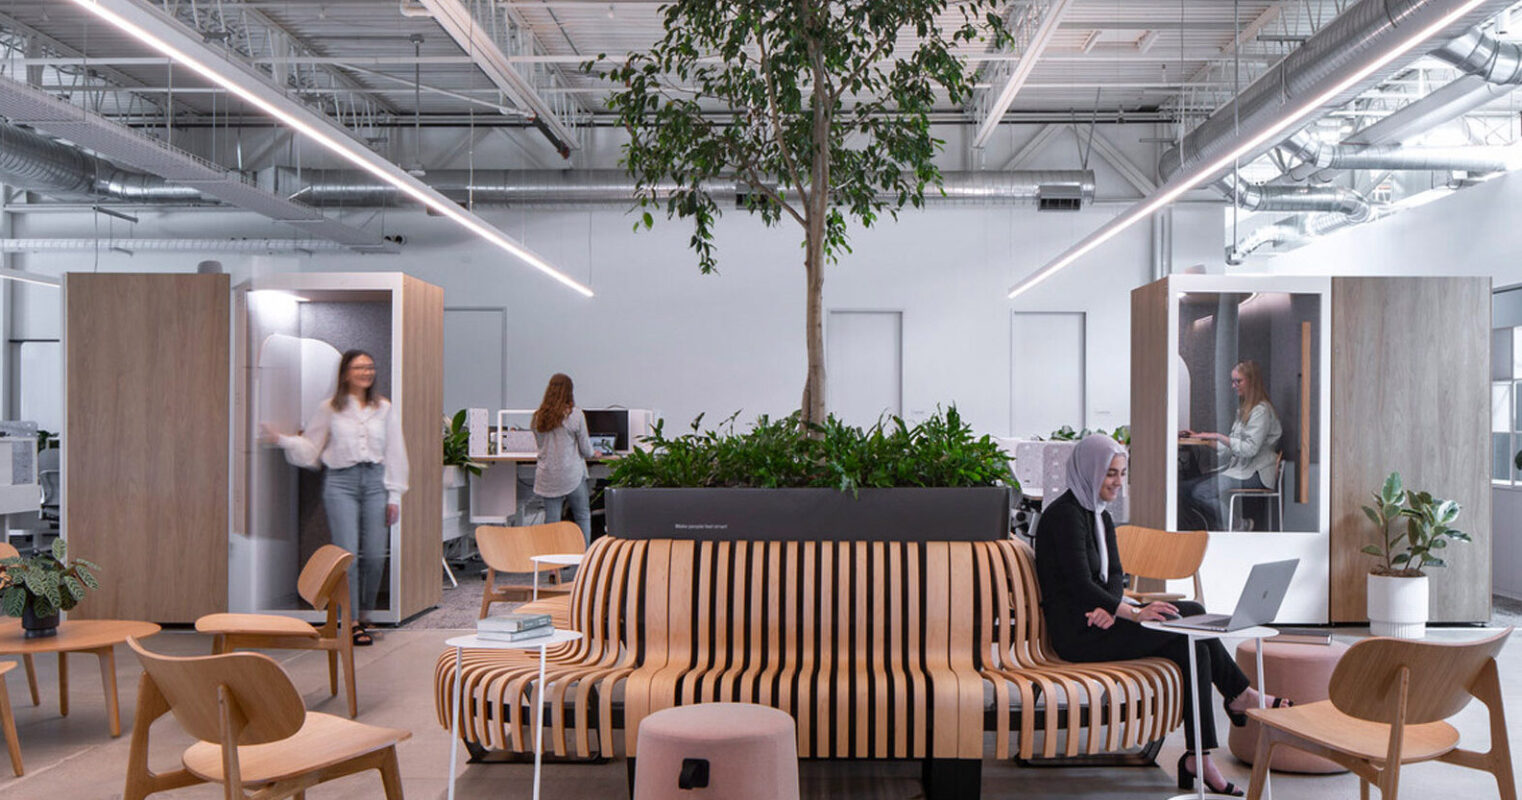 Spacious office interior bathed in natural light, featuring an eclectic mix of modern wooden desks, upholstered couches, and an indoor planting area offering a blend of functionality and biophilic design. Overhead exposed ductwork complements the industrial-chic aesthetic.